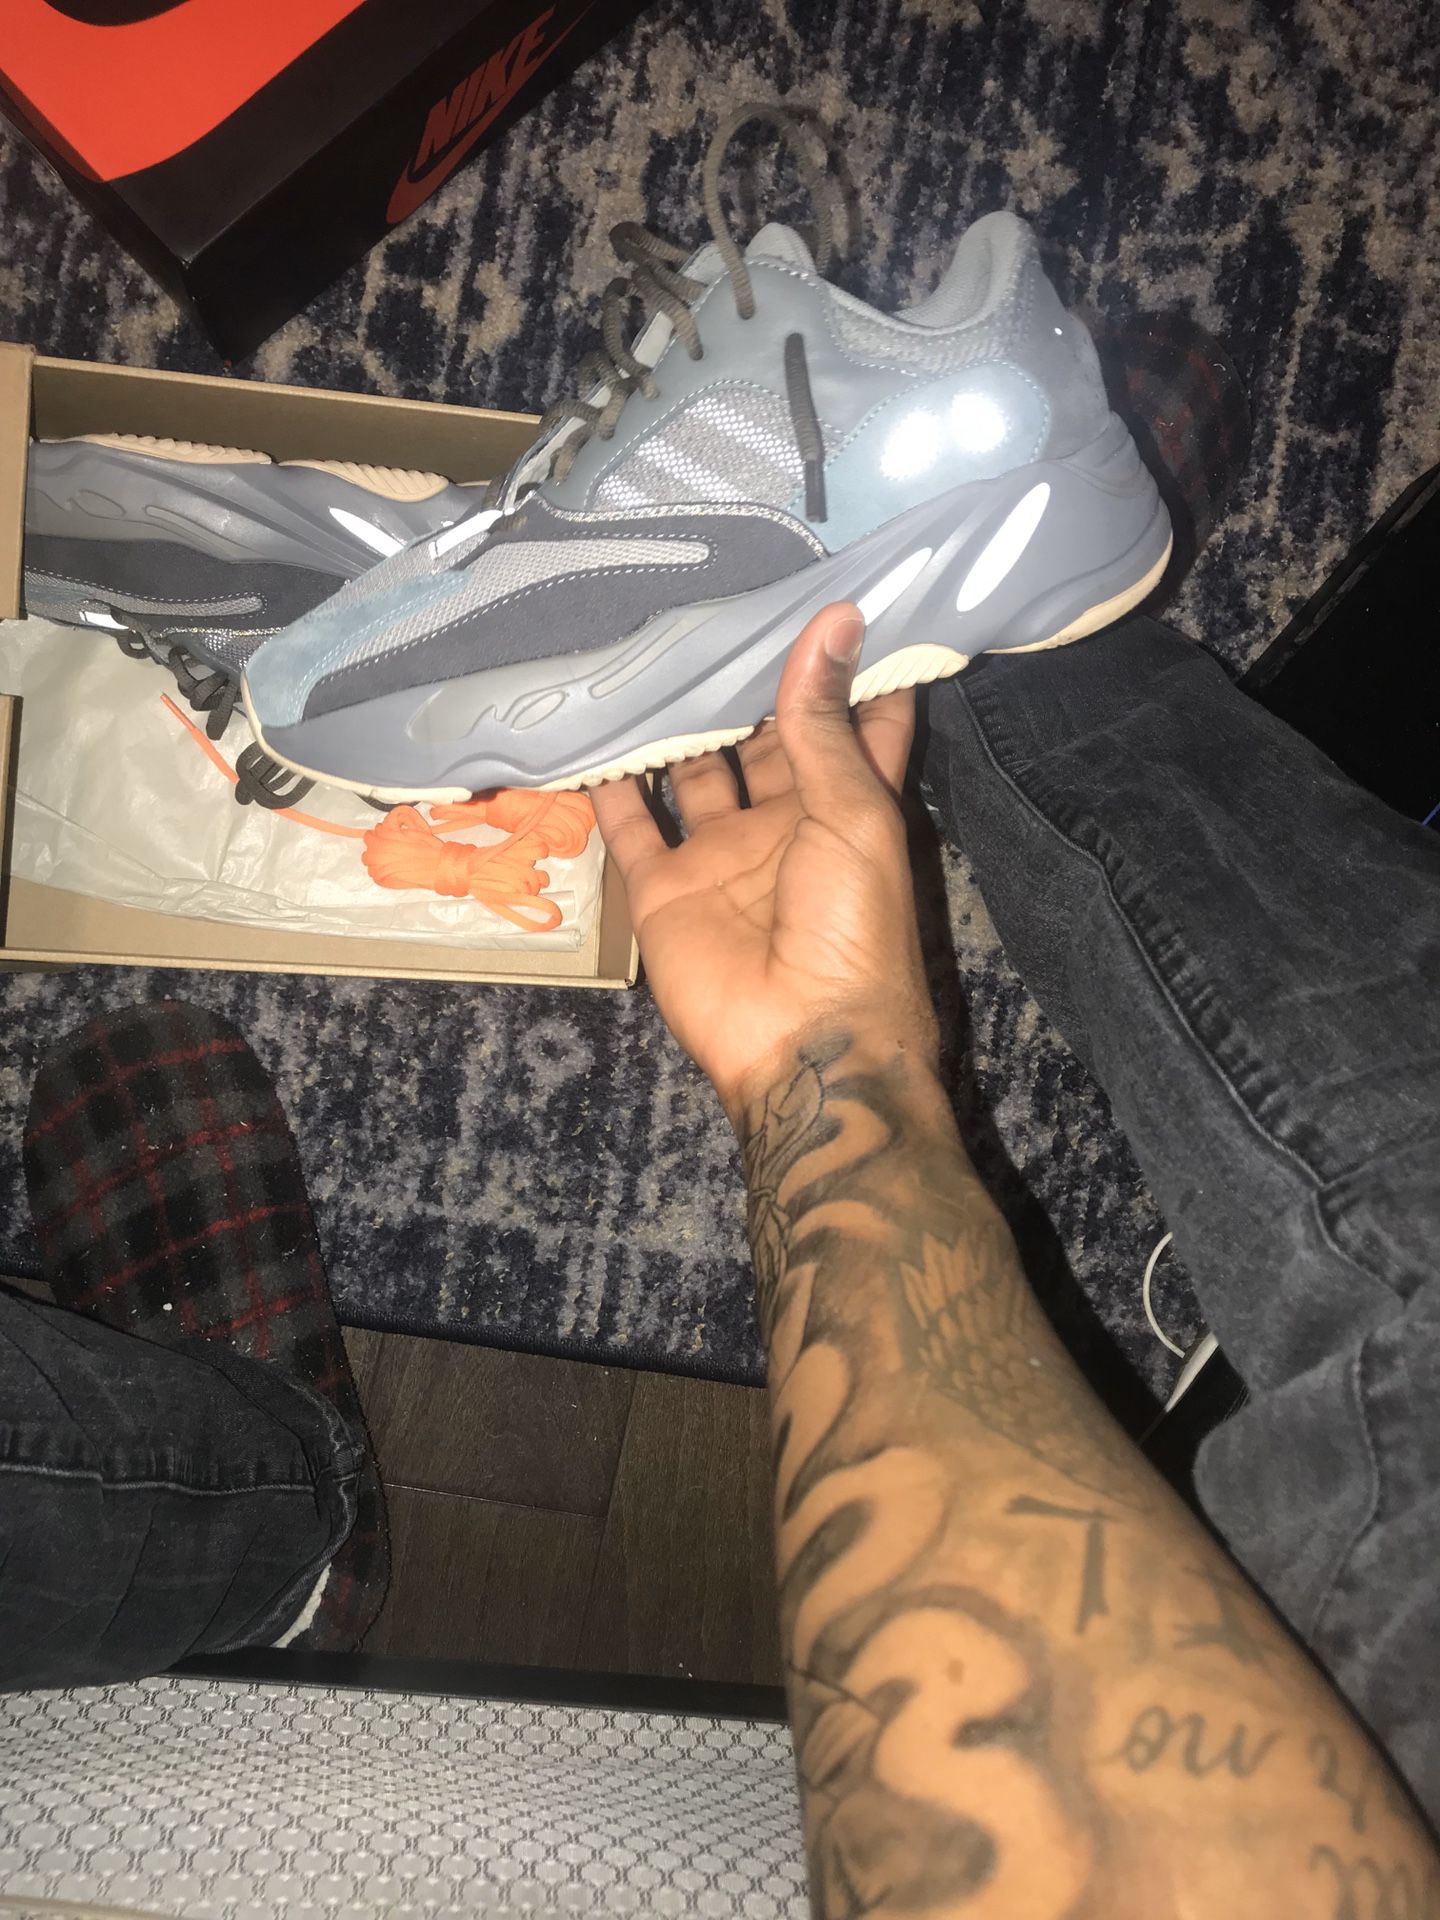 teal blue yeezy 700s size 11